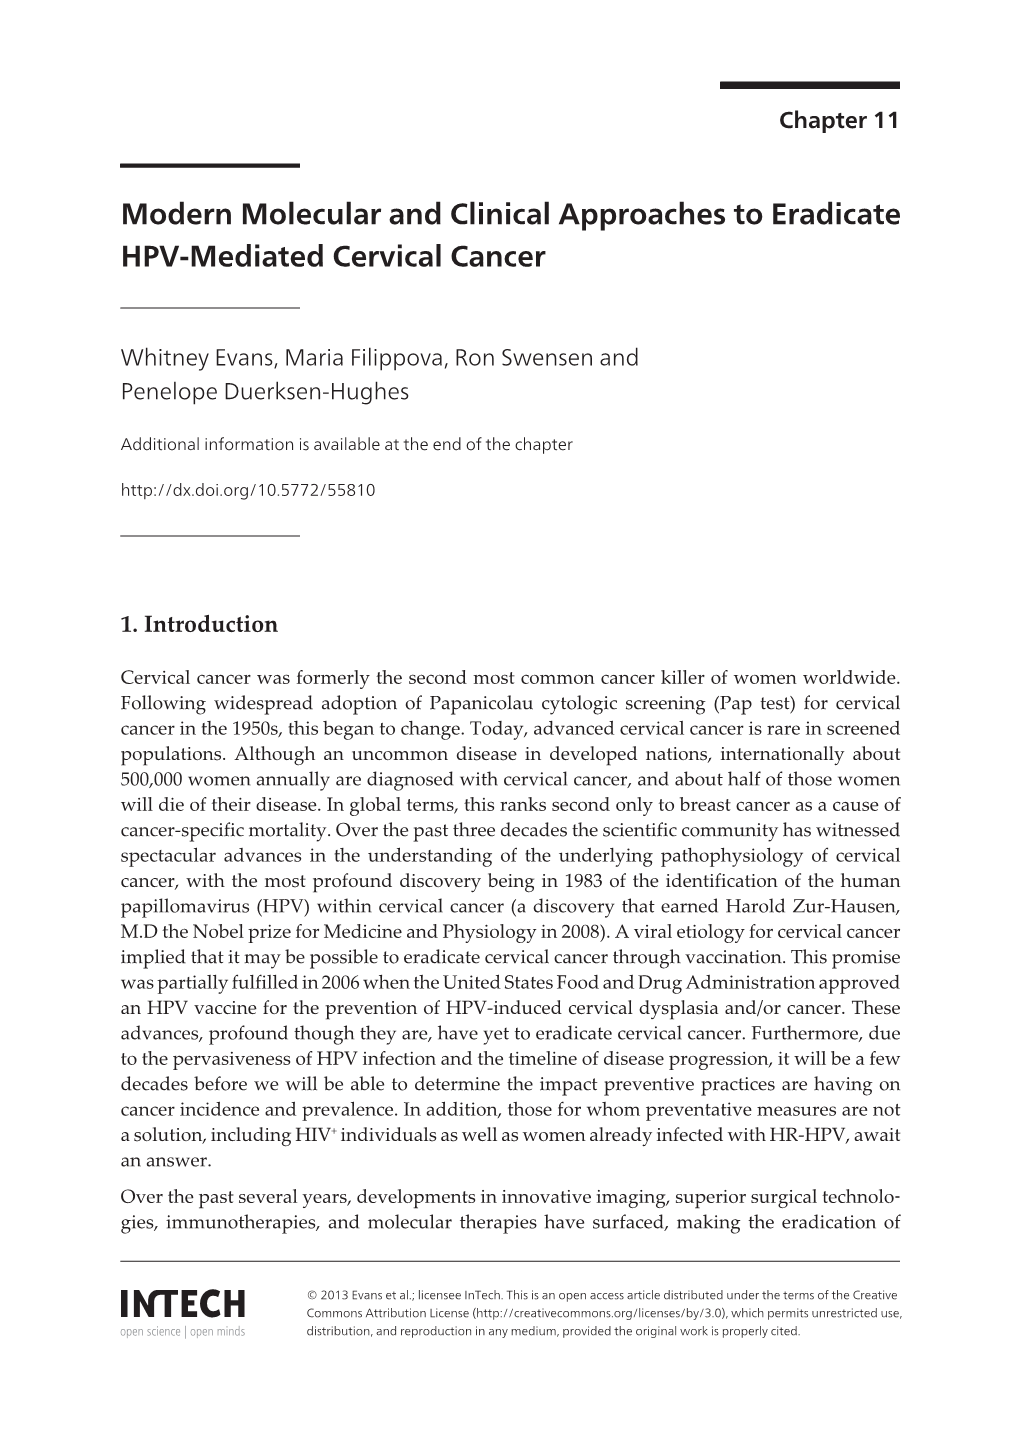 Modern Molecular and Clinical Approaches to Eradicate HPV-Mediated Cervical Cancer